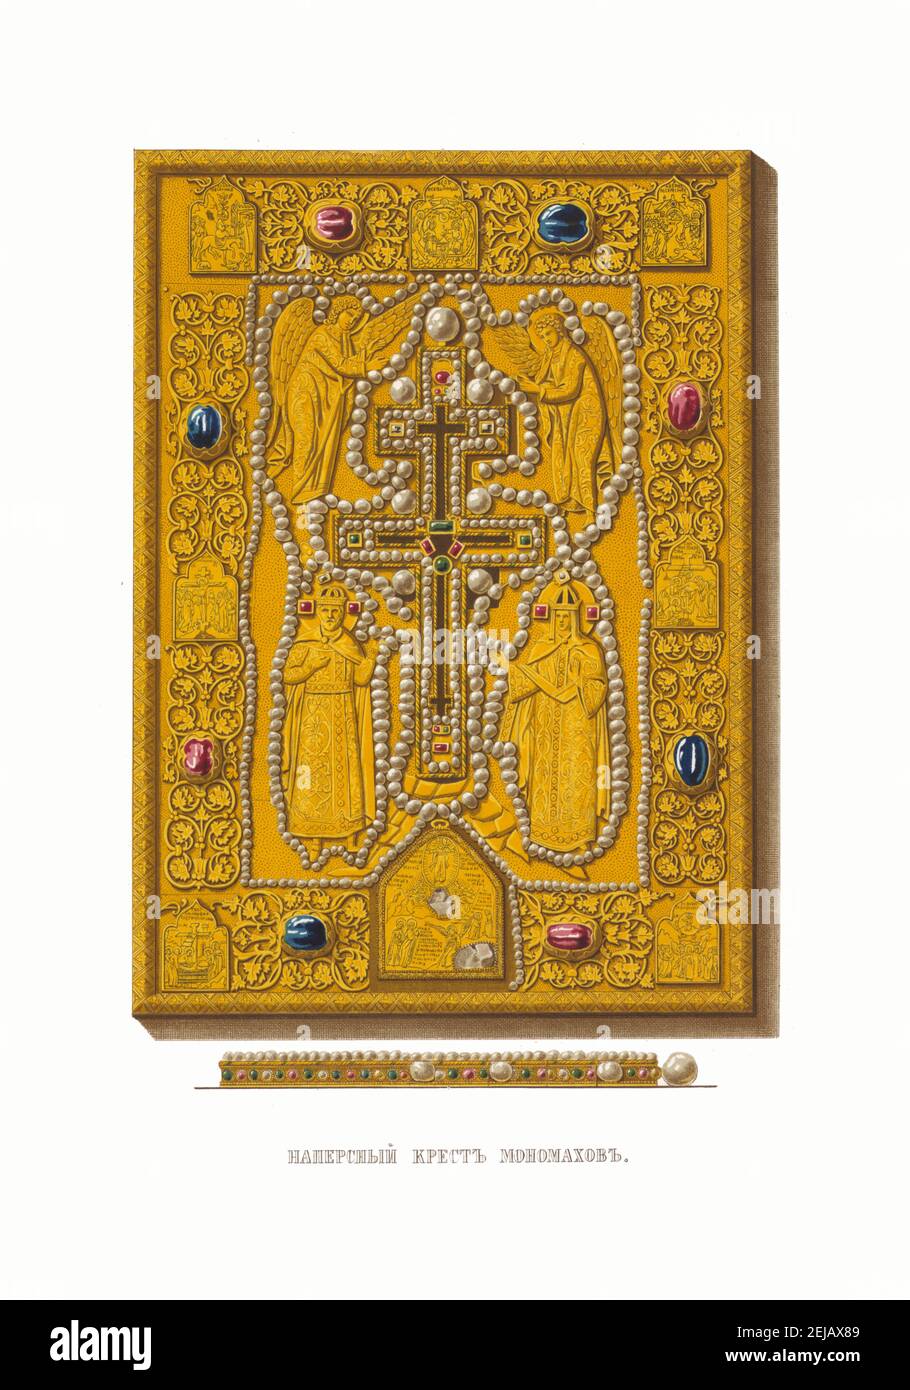 Monomakh's Pectoral. From the Antiquities of the Russian State. Museum: PRIVATE COLLECTION. Author: Fyodor Grigoryevich Solntsev. Stock Photo